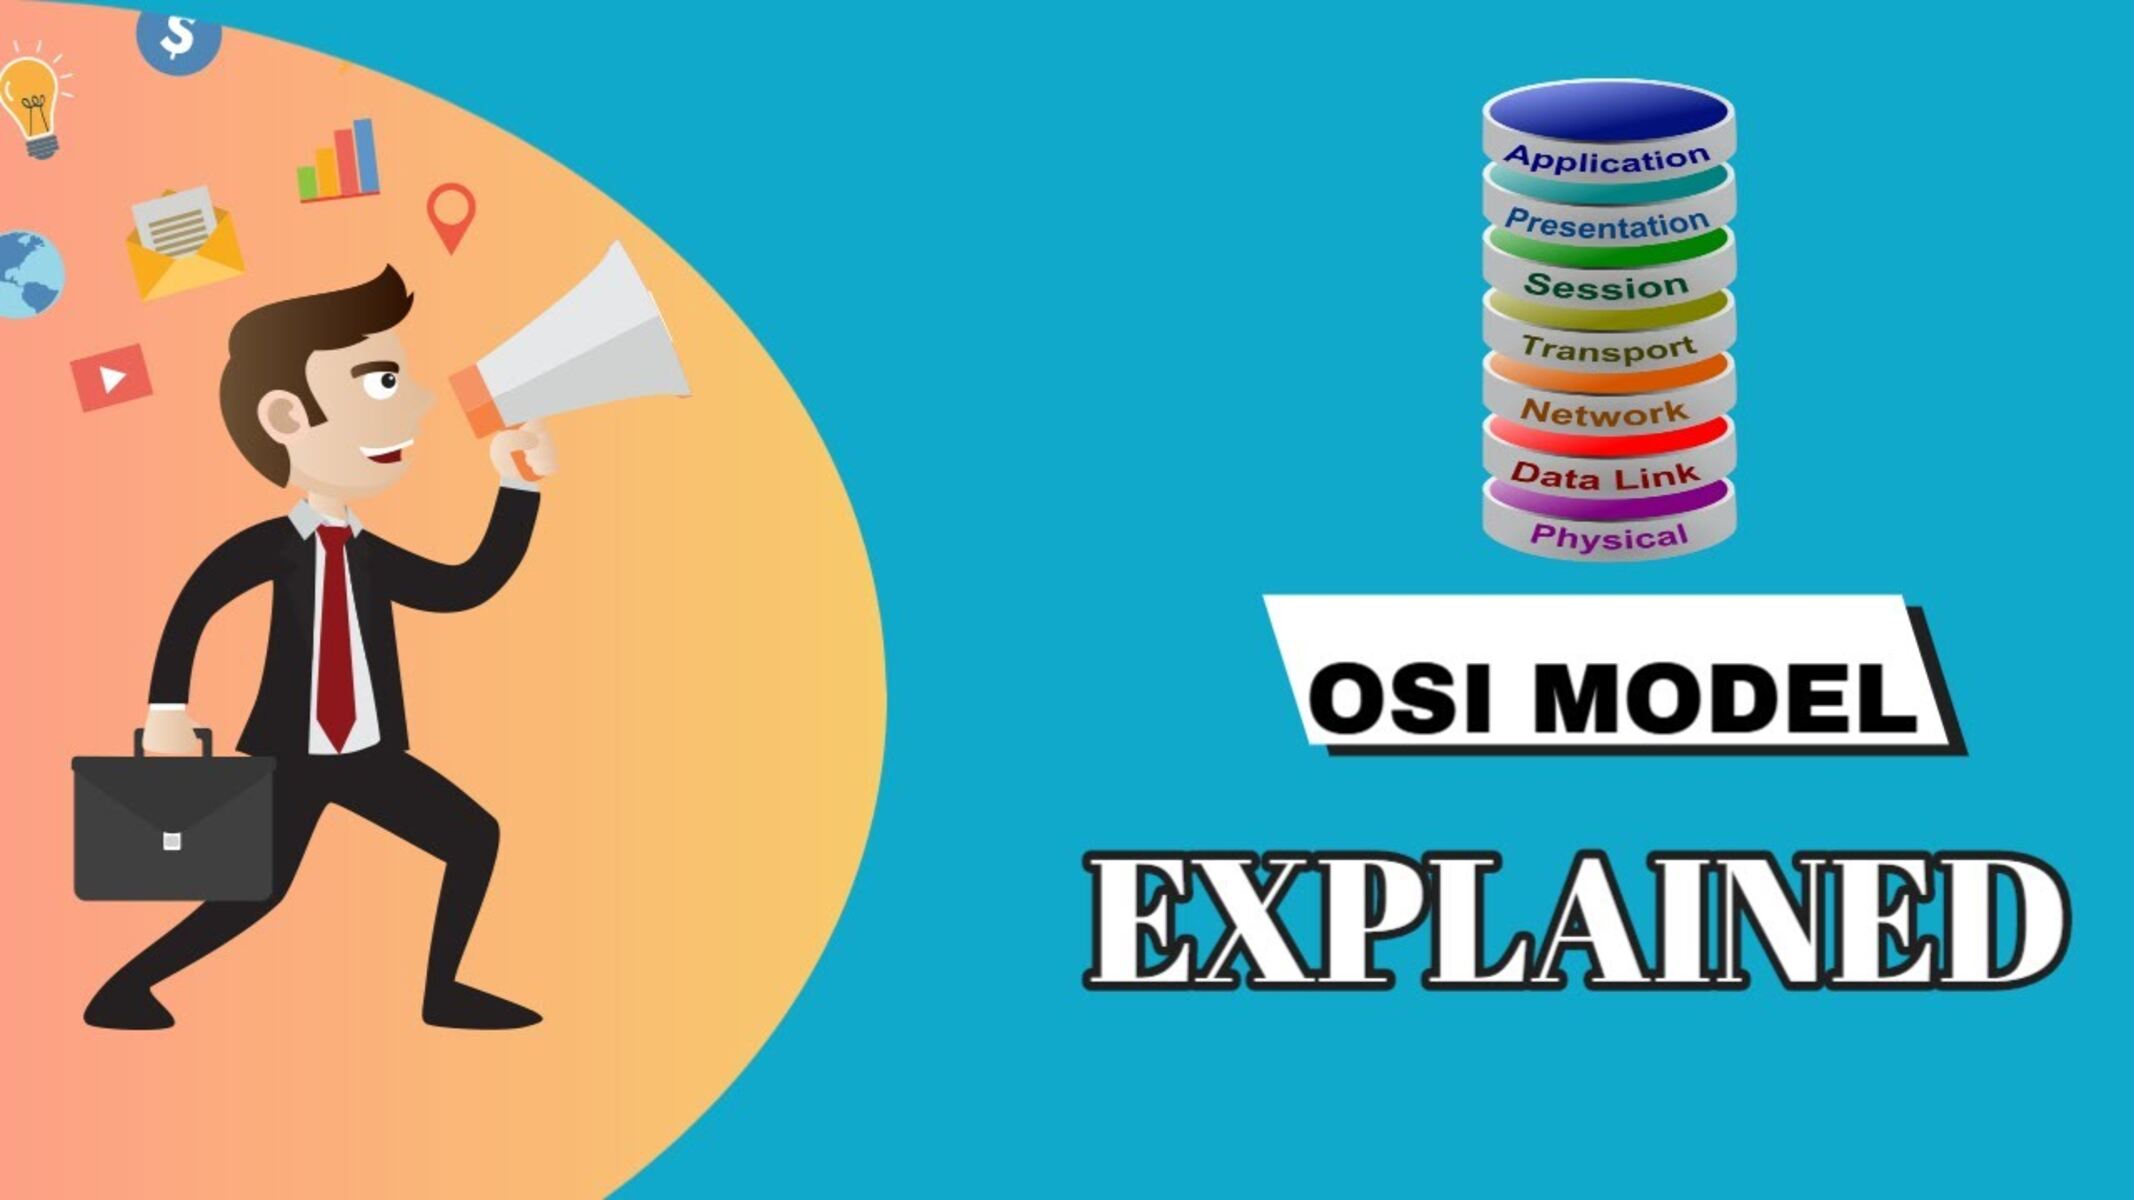 How Do OSI Layers Help A Document In A Chicago Workstation Get To A Workstation In Denver?